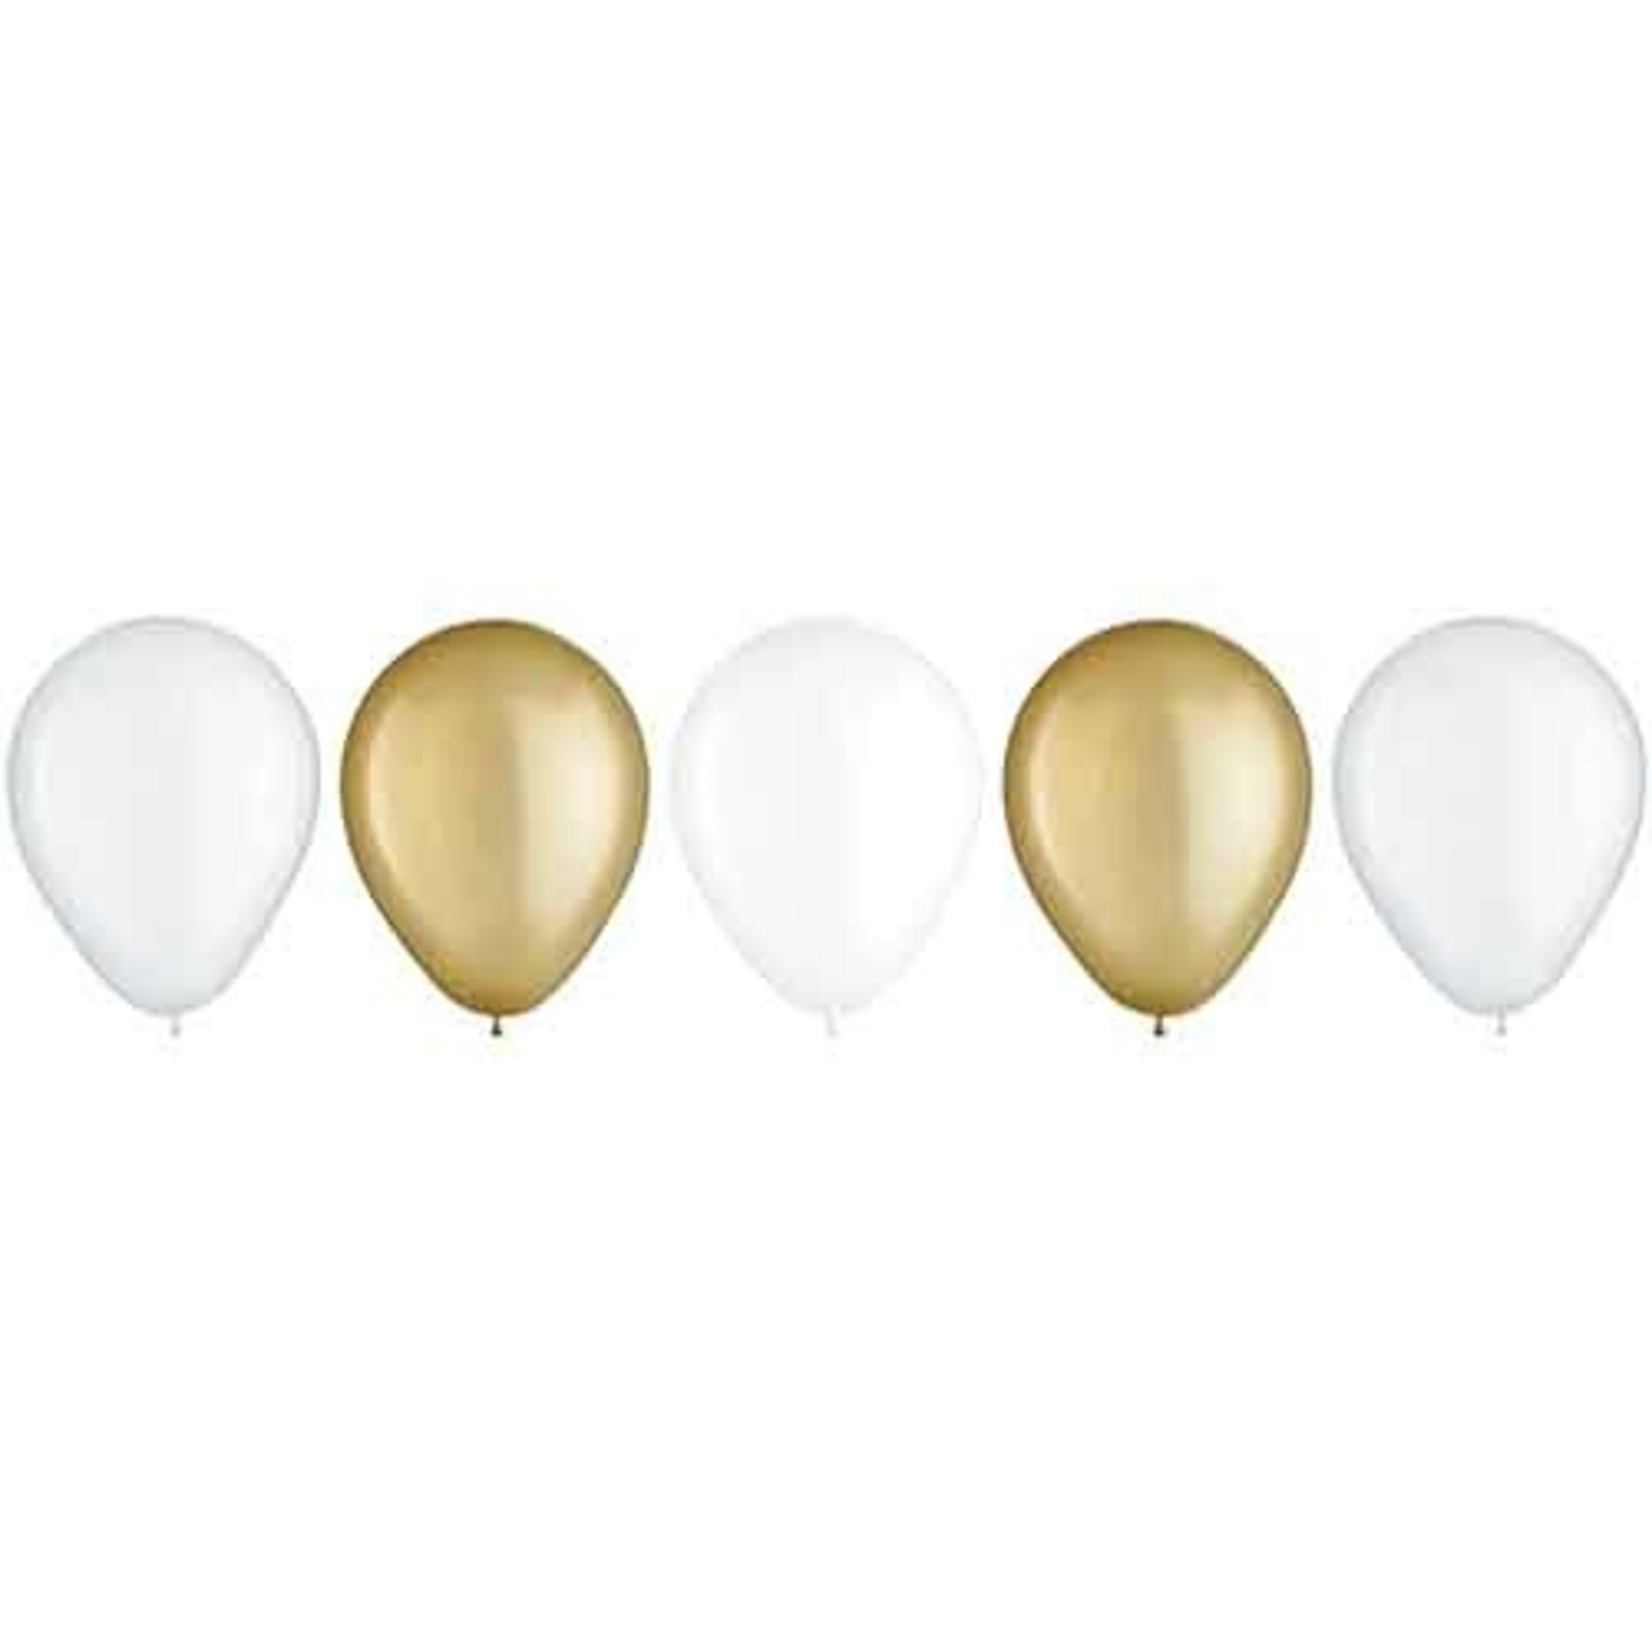 Amscan 11" Golden Latex Balloon Assorted Color Mix - 15ct.